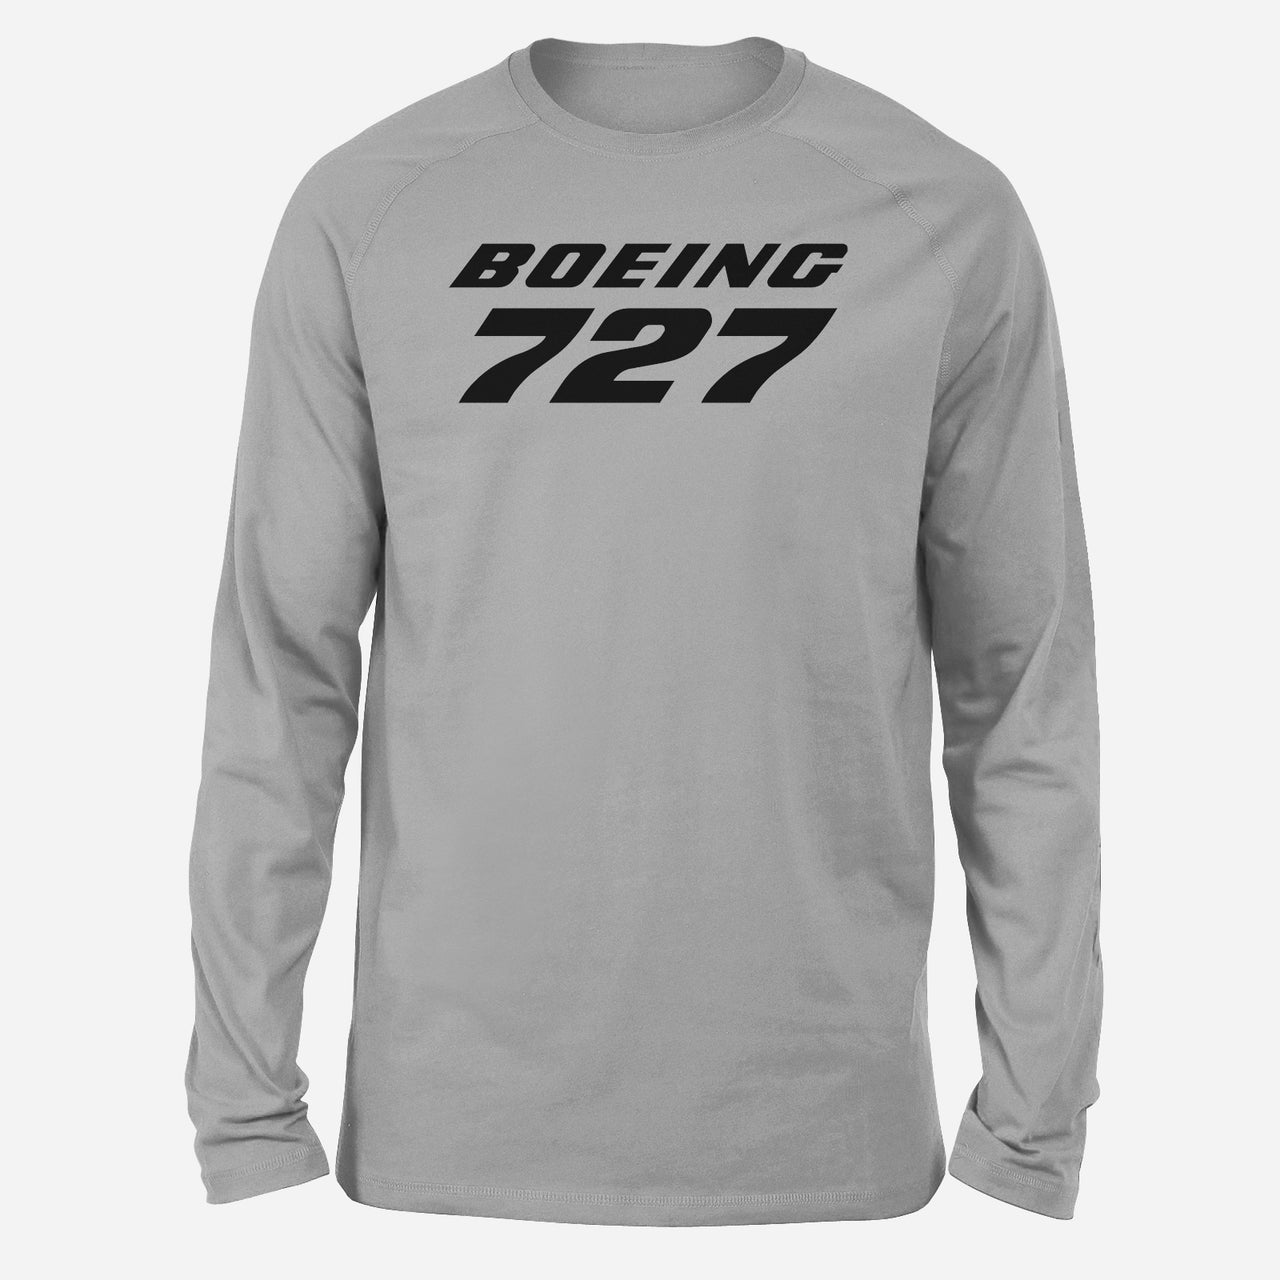 Boeing 727 & Text Designed Long-Sleeve T-Shirts